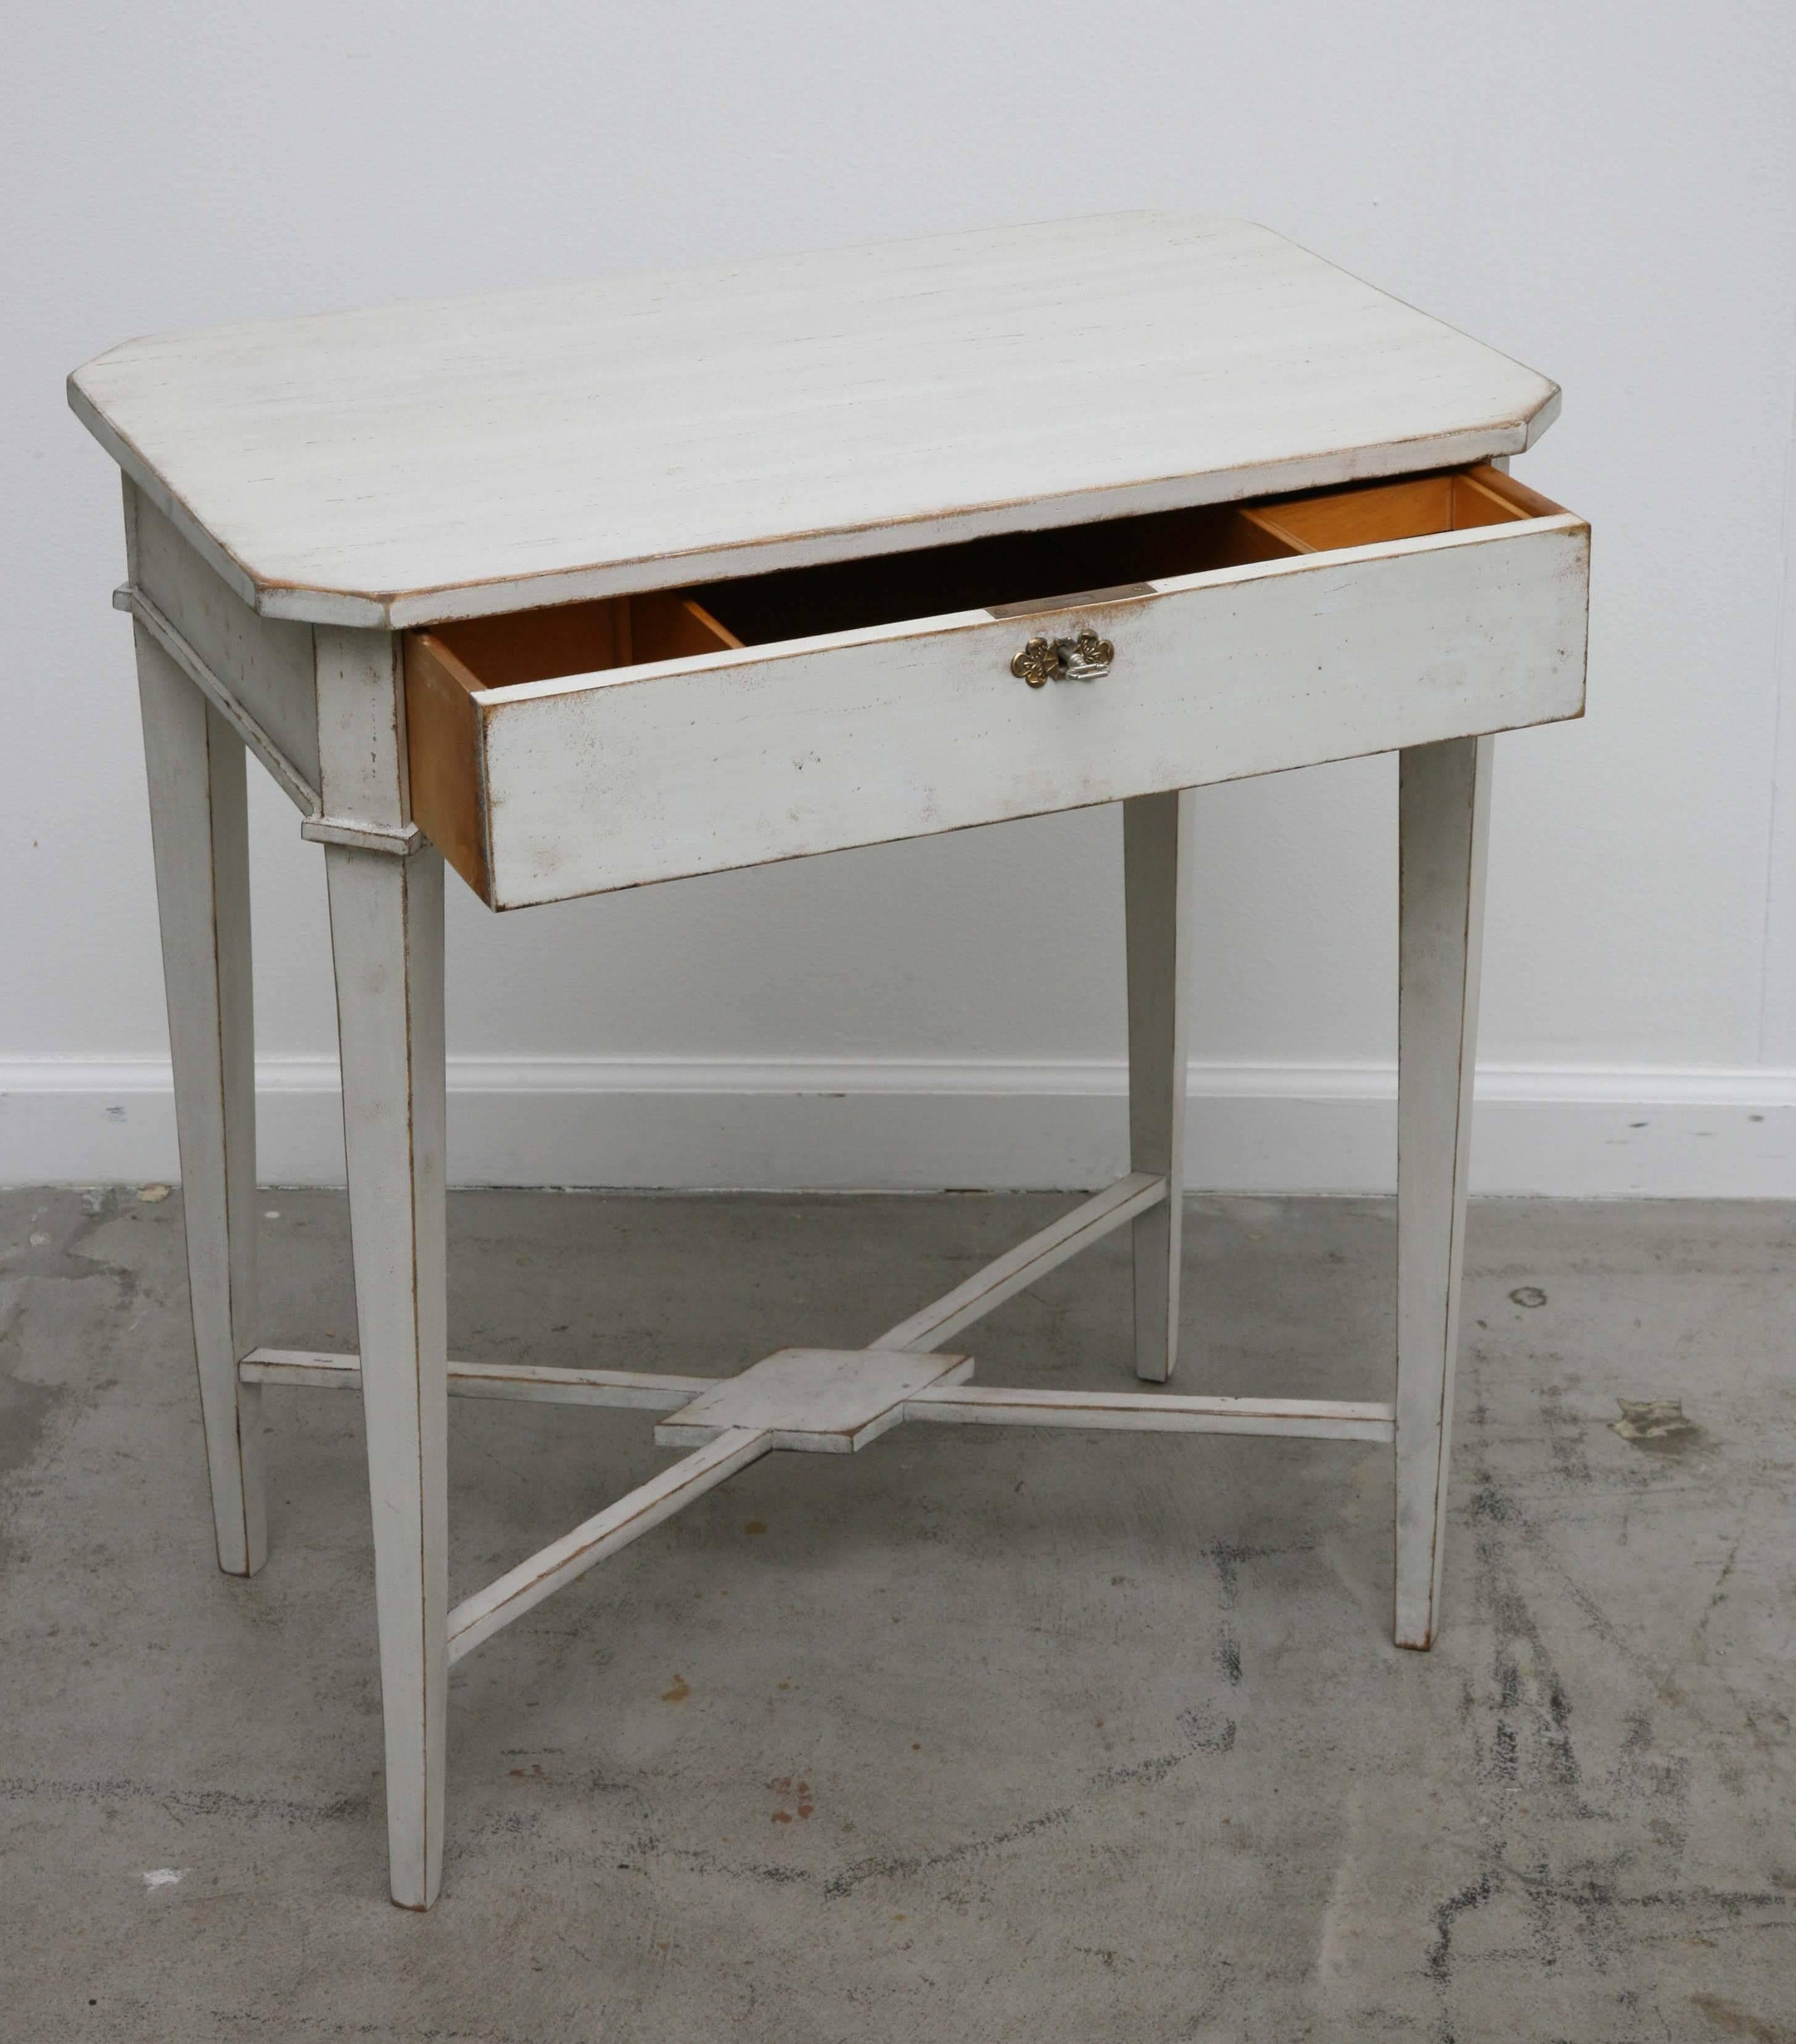 Antique Swedish Gustavian Pained Work Table, 19th Century 1